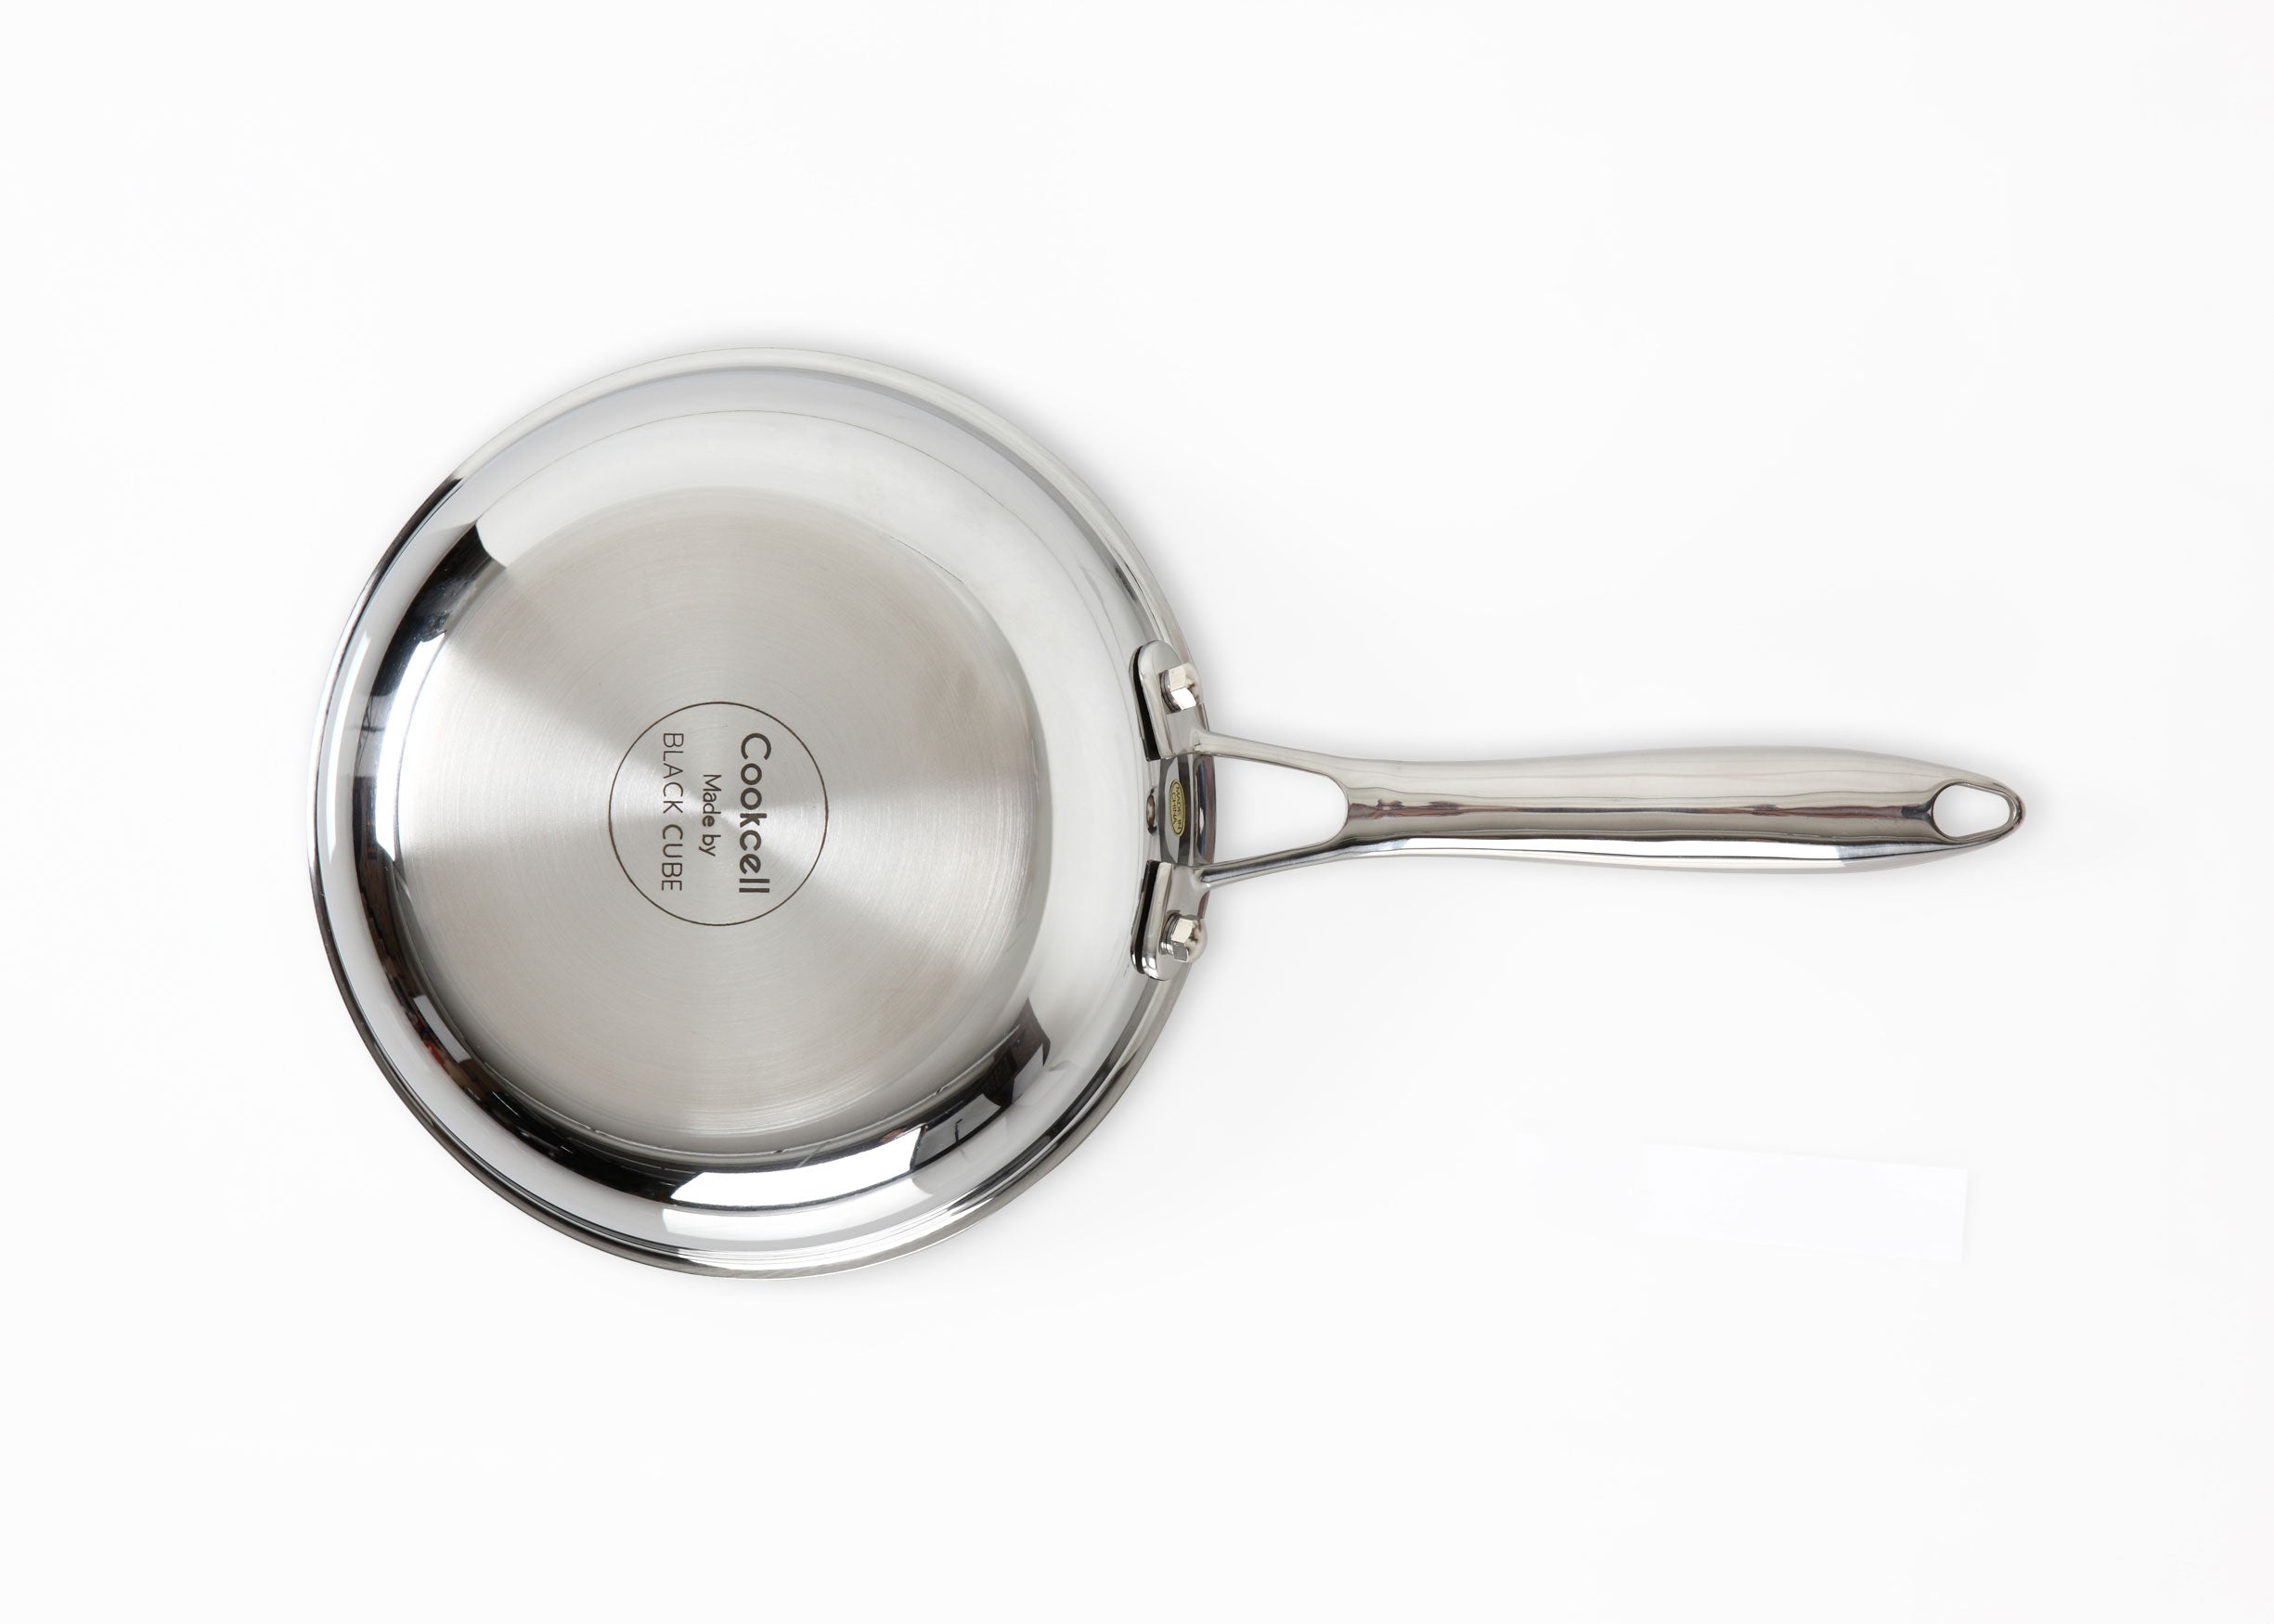 COOKCELL Stainless Steel Non-stick Hybrid Frypan 32cm